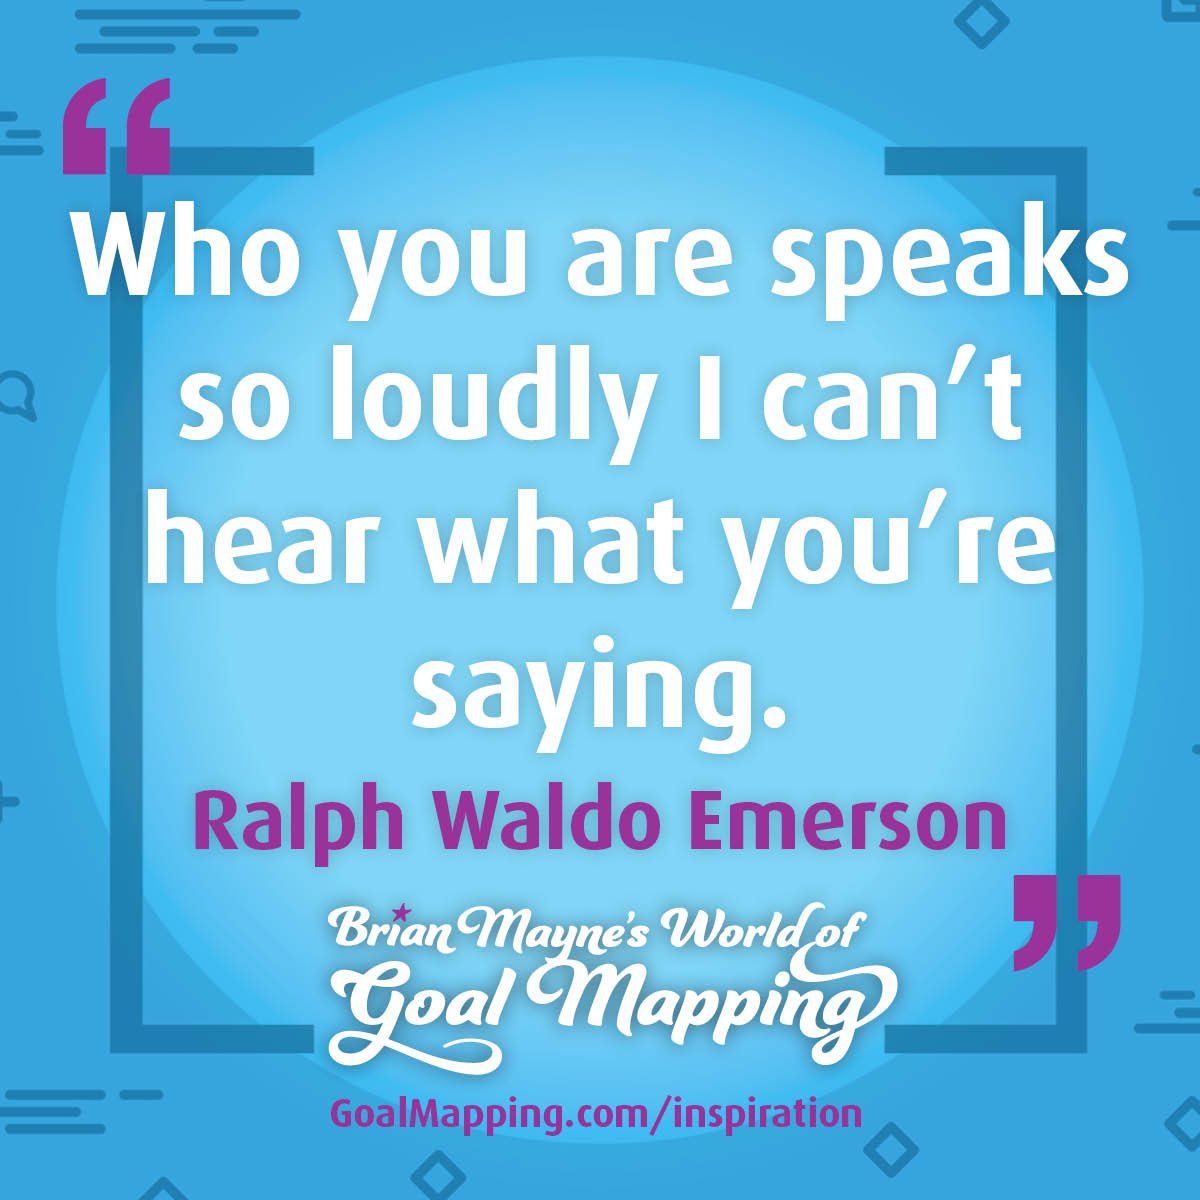 "Who you are speaks so loudly I can’t hear what you’re saying." Ralph Waldo Emerson